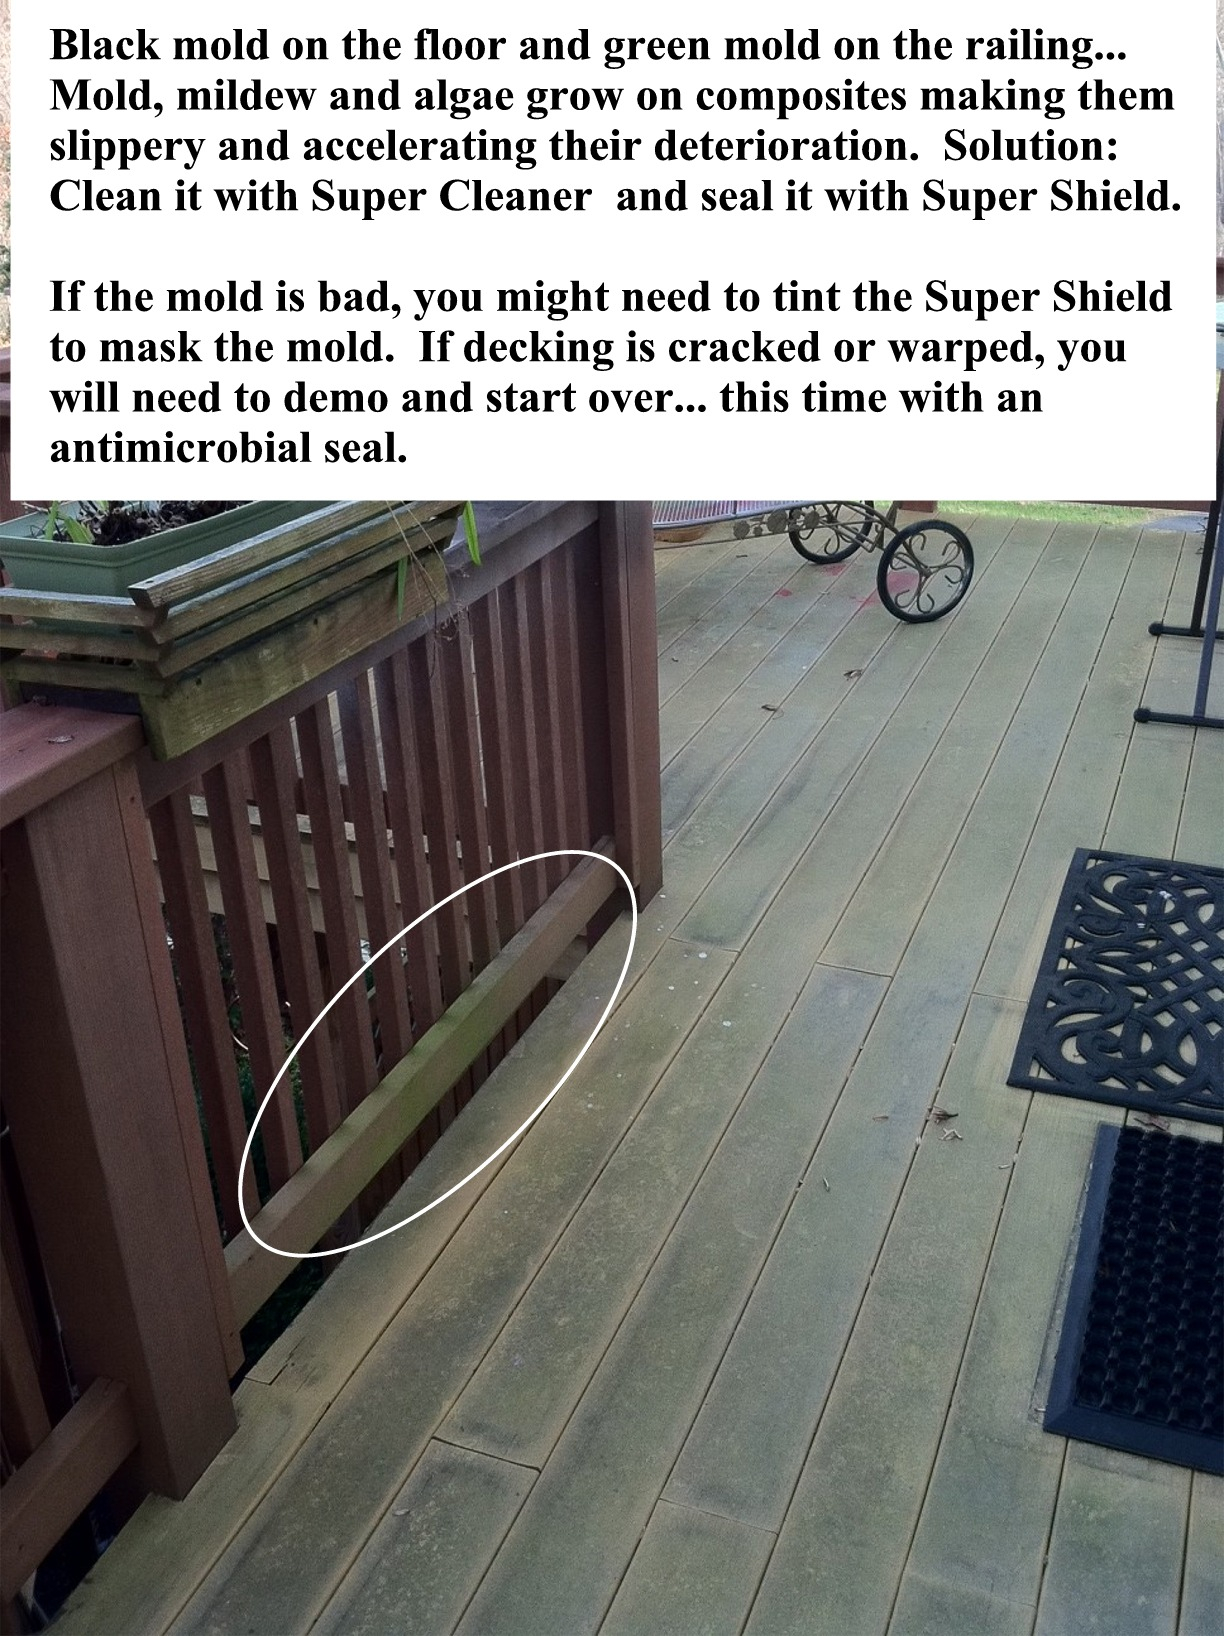 Composite Decking And Railings Clean Stain Seal Paint Problems intended for proportions 1224 X 1636